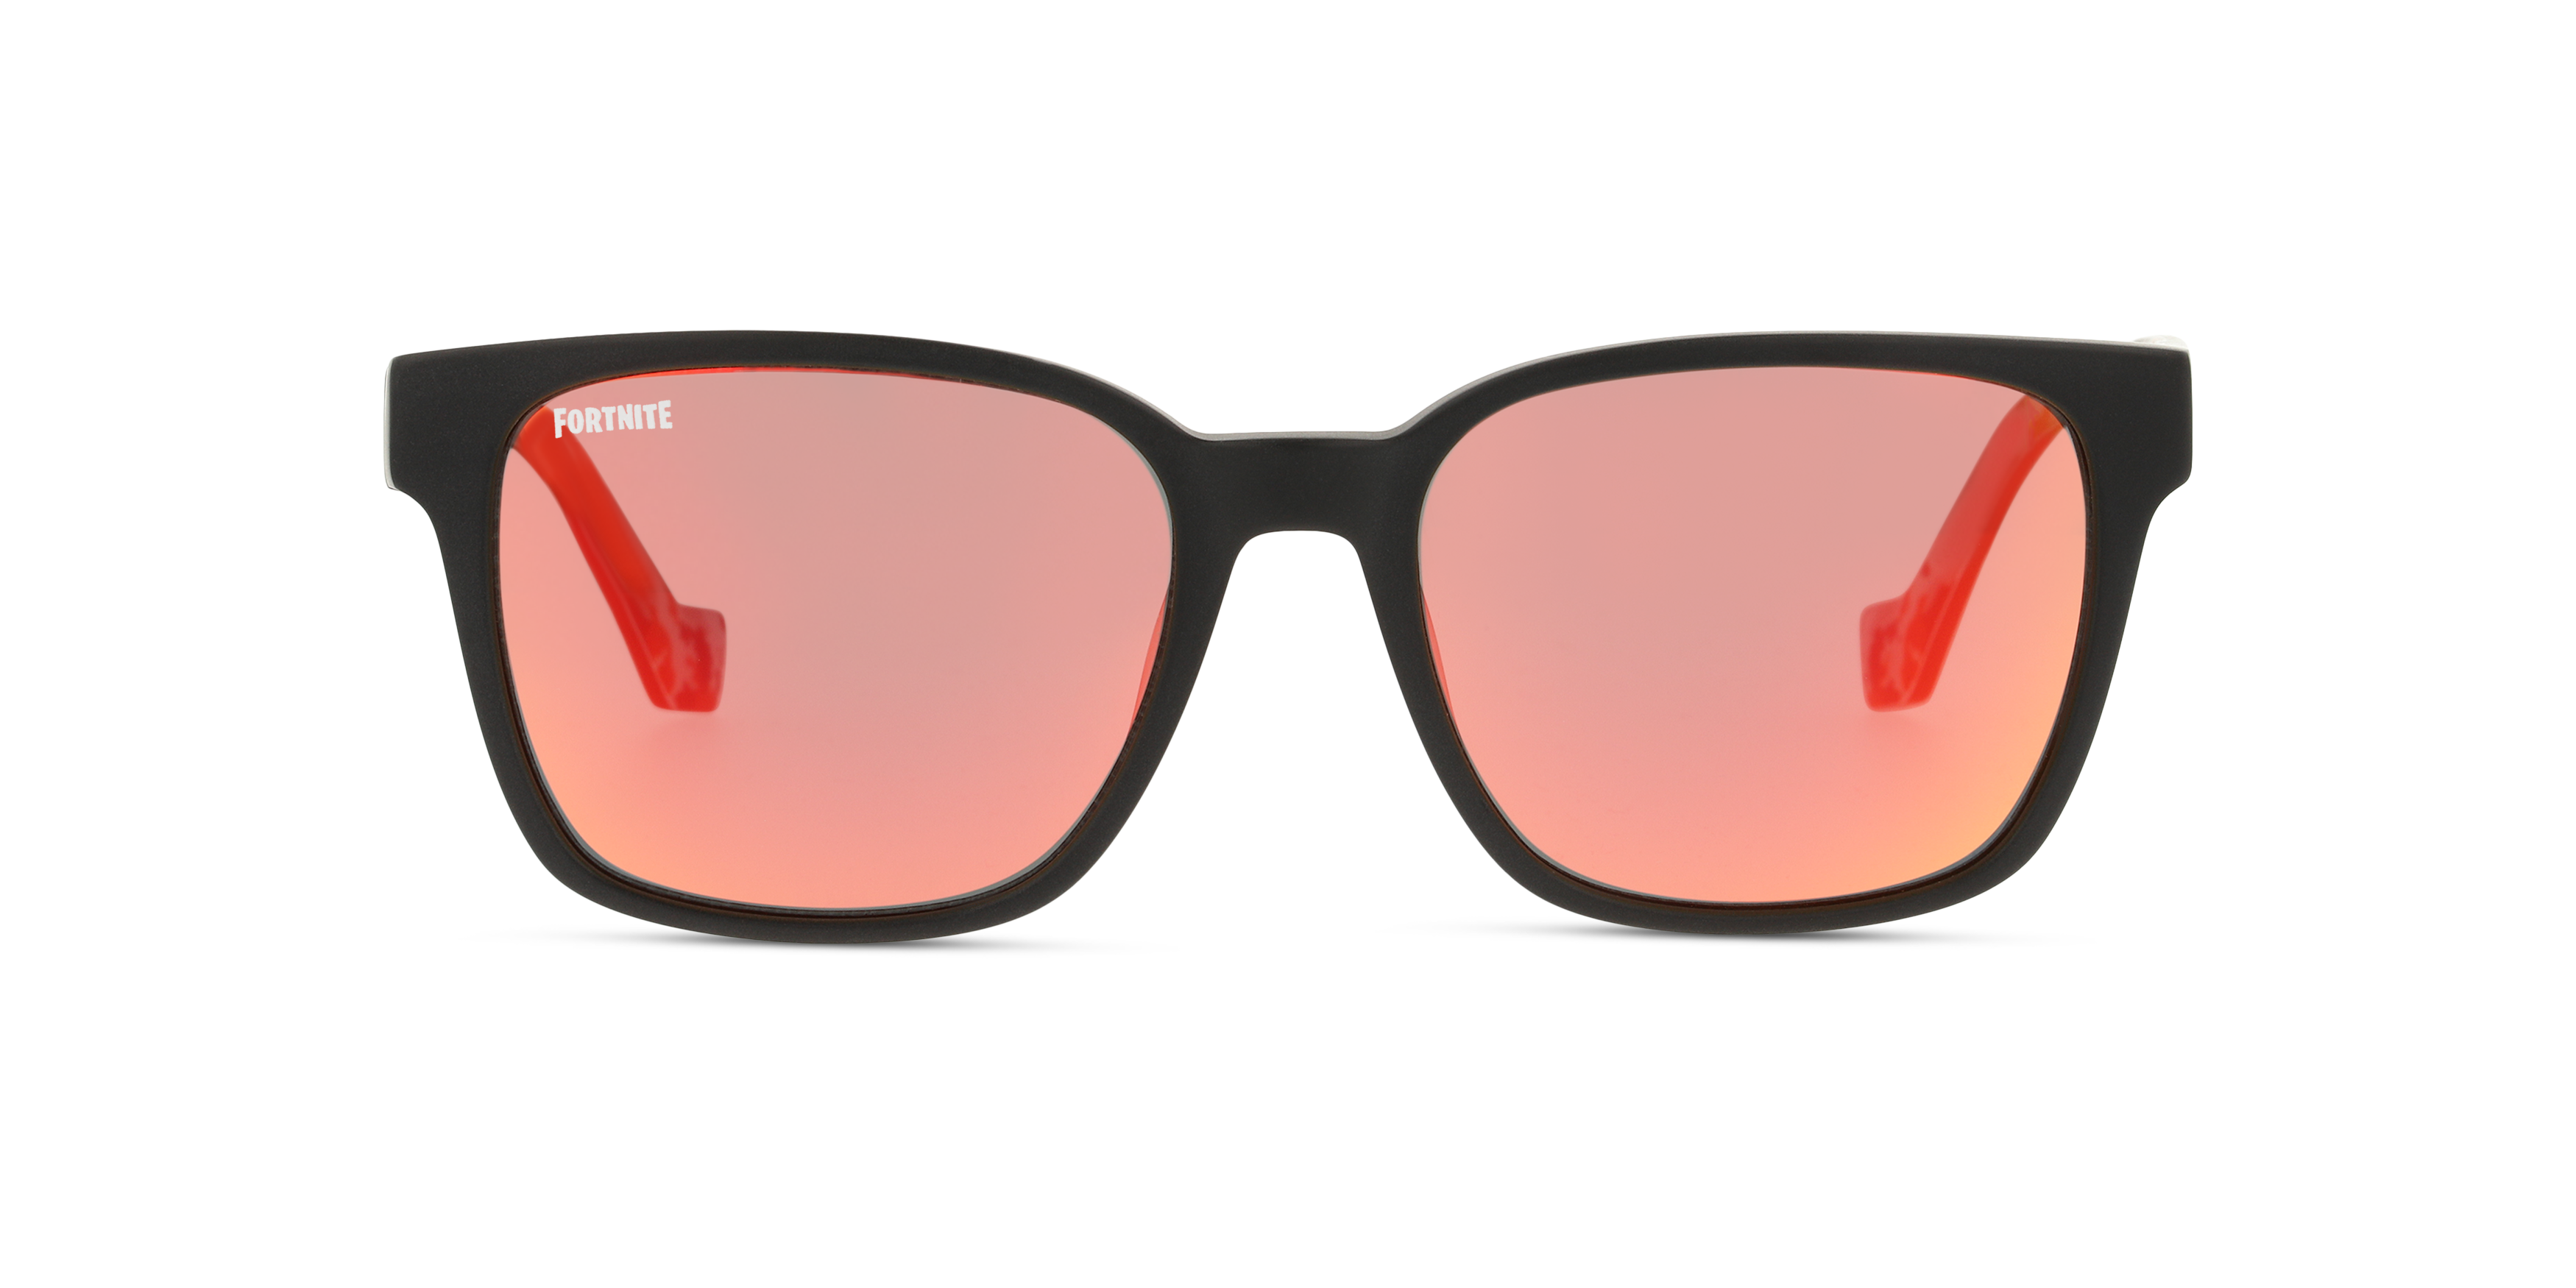 Front Fortnite with Unofficial UNSU0156 (BBGR) Sunglasses Grey / Black